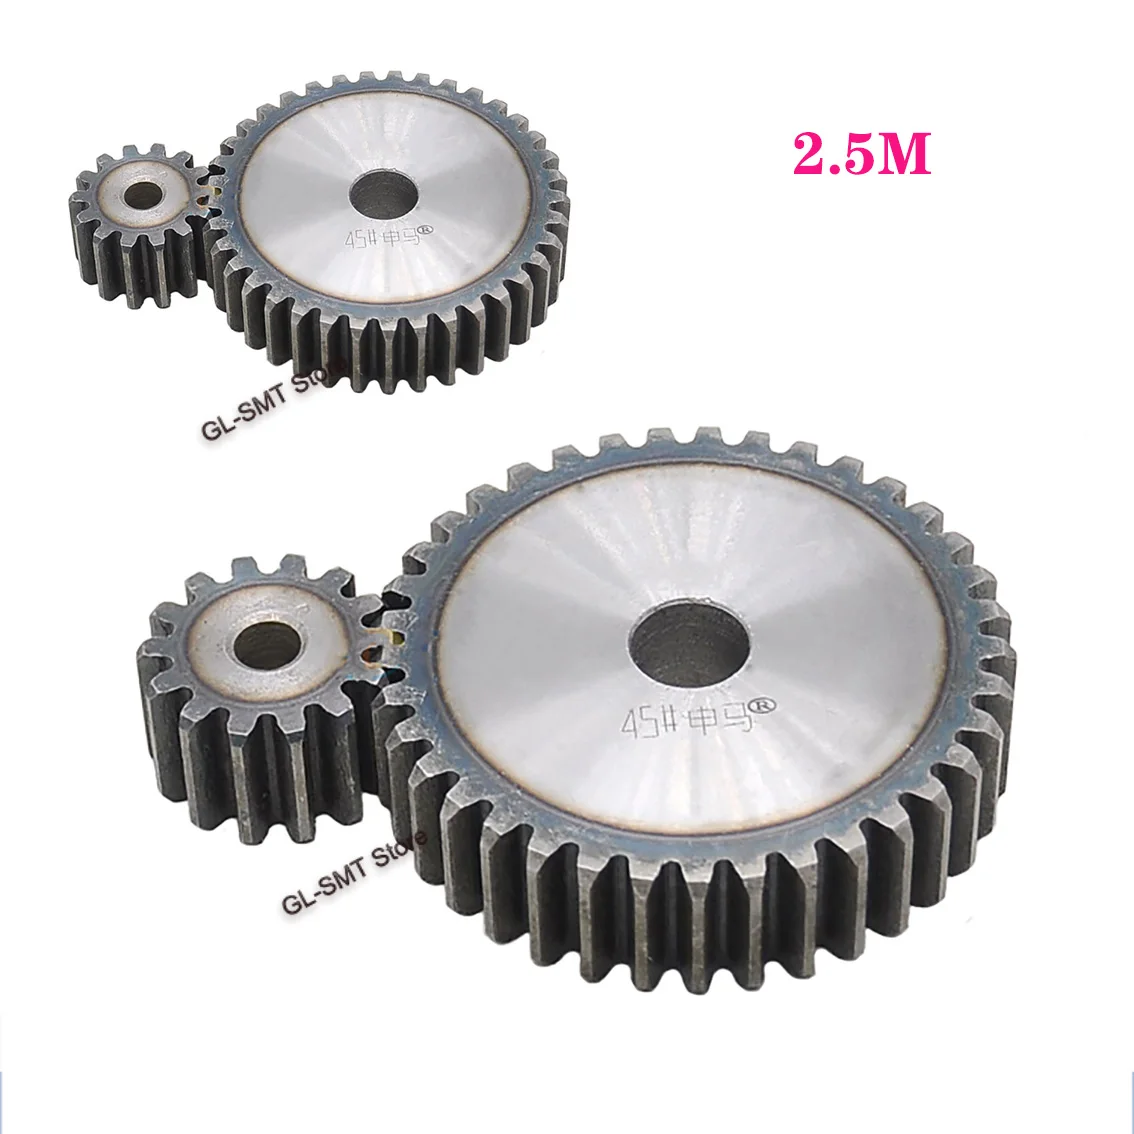 

1Pcs Mod 2.5 Spur Gear 2.5M 10-25 Tooth 45# Carbon Steel Thick 25mm Metal Mechanical Transmission Pinion Gear